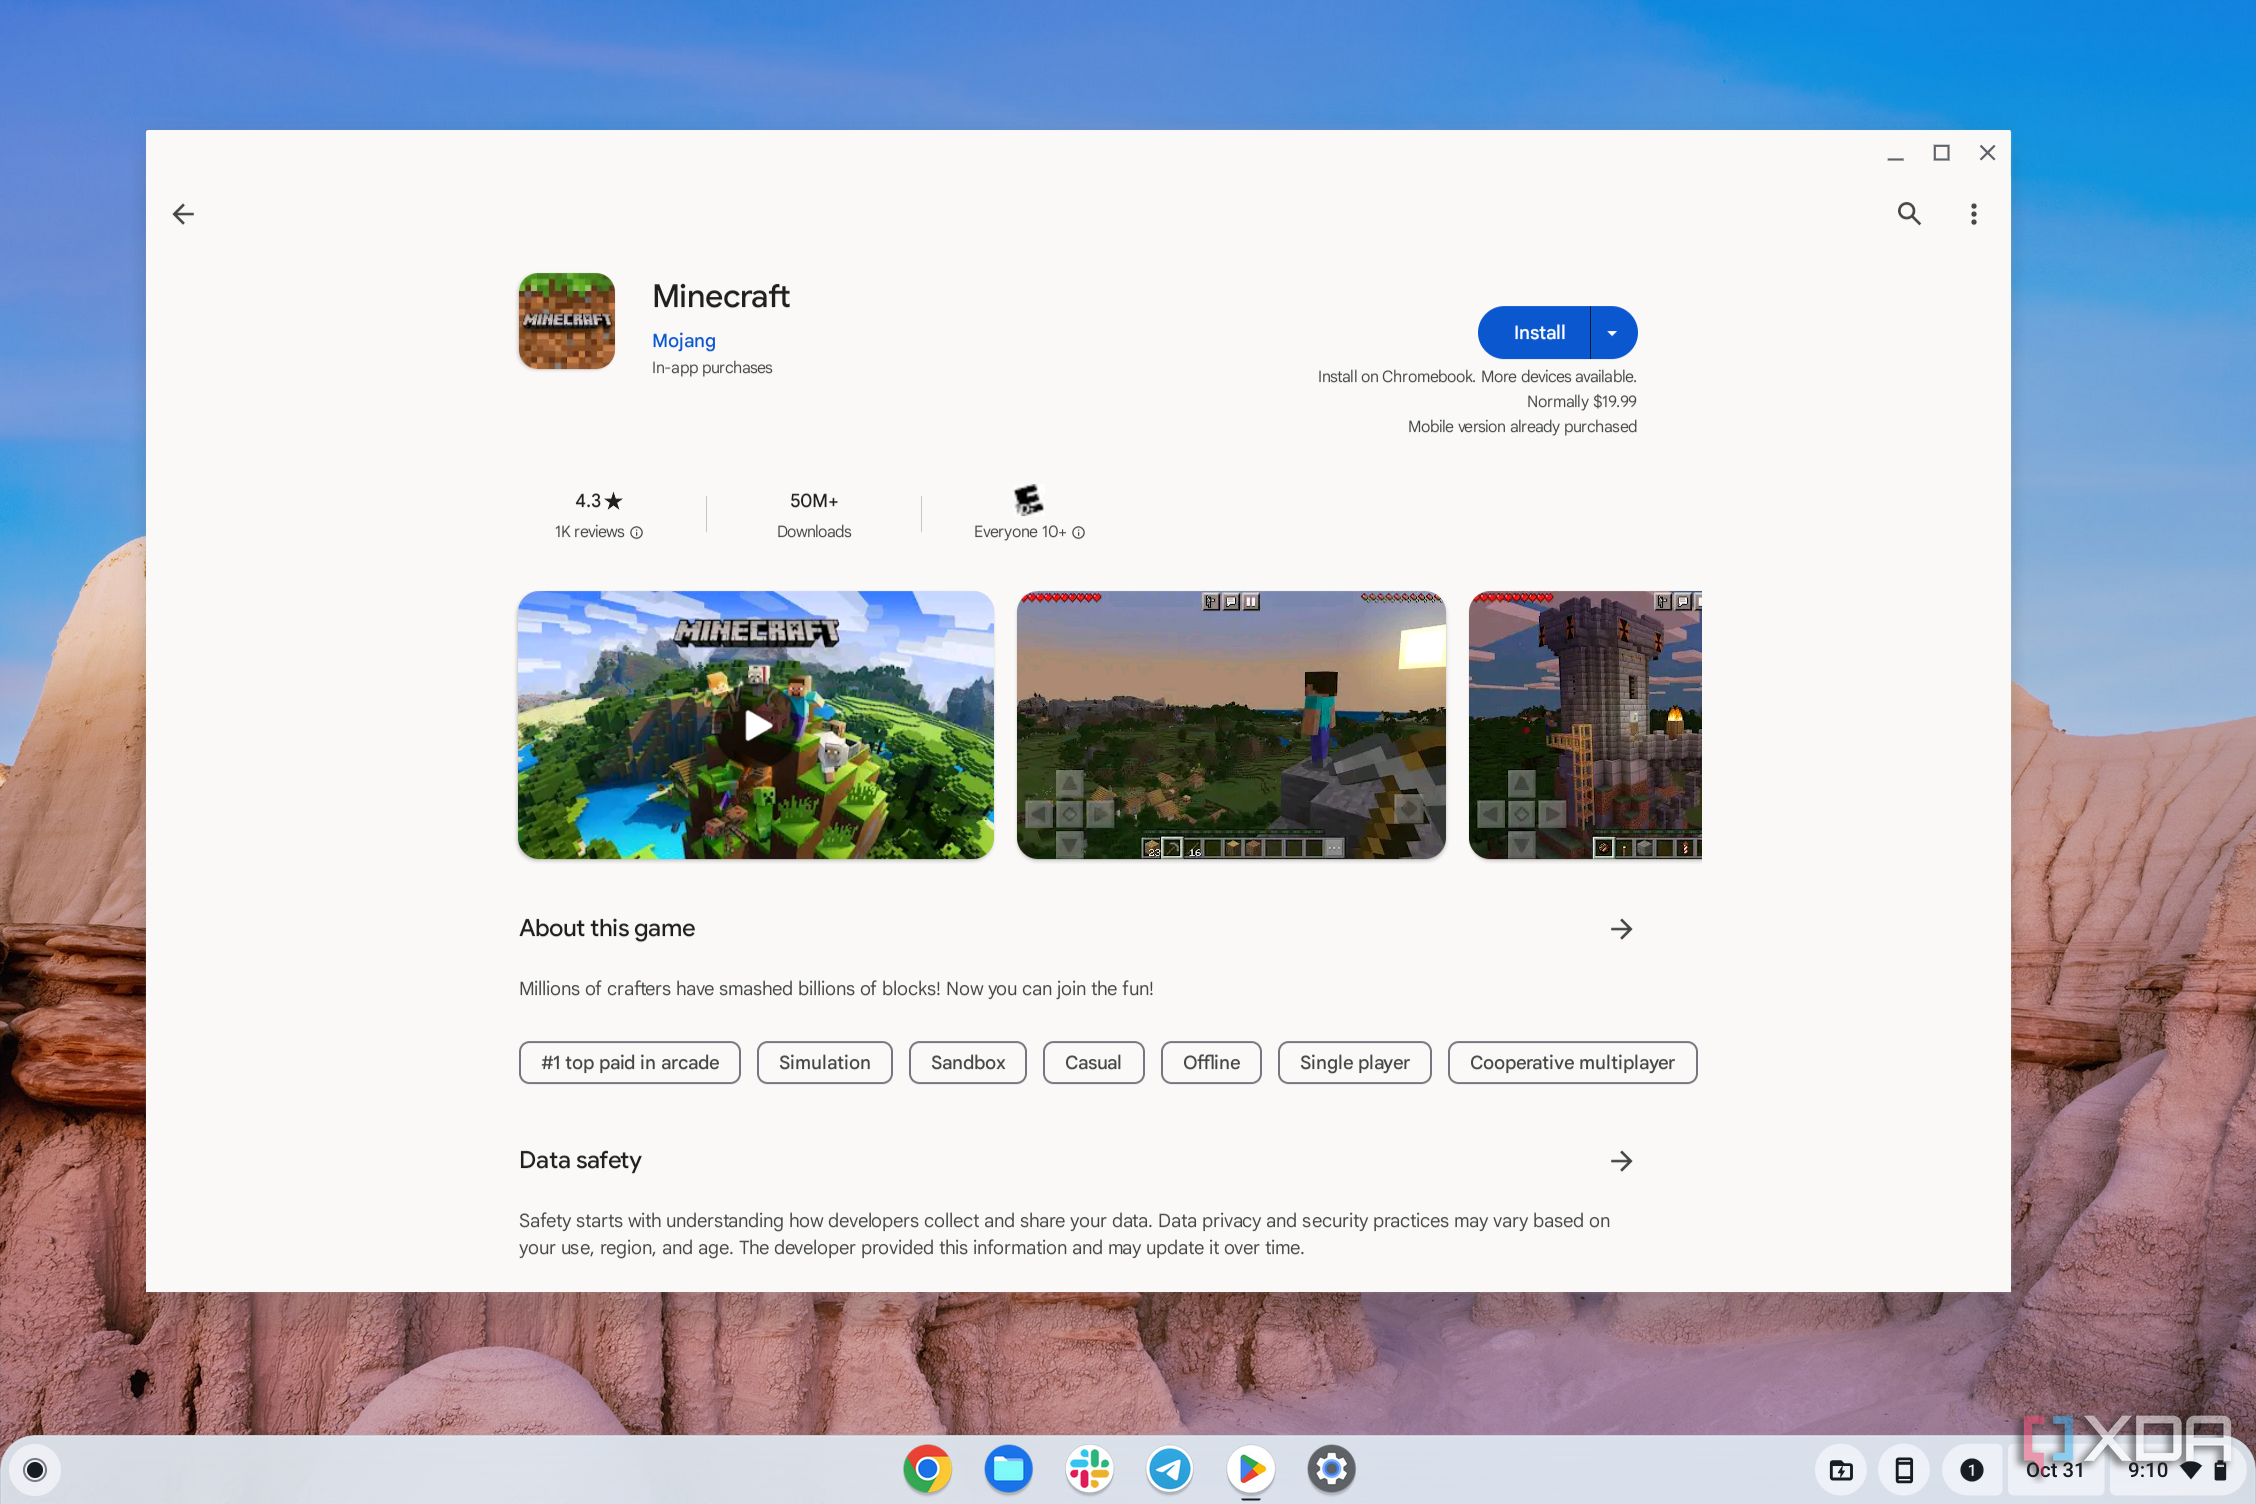 Minecraft in the Google Play Store on ChromeOS